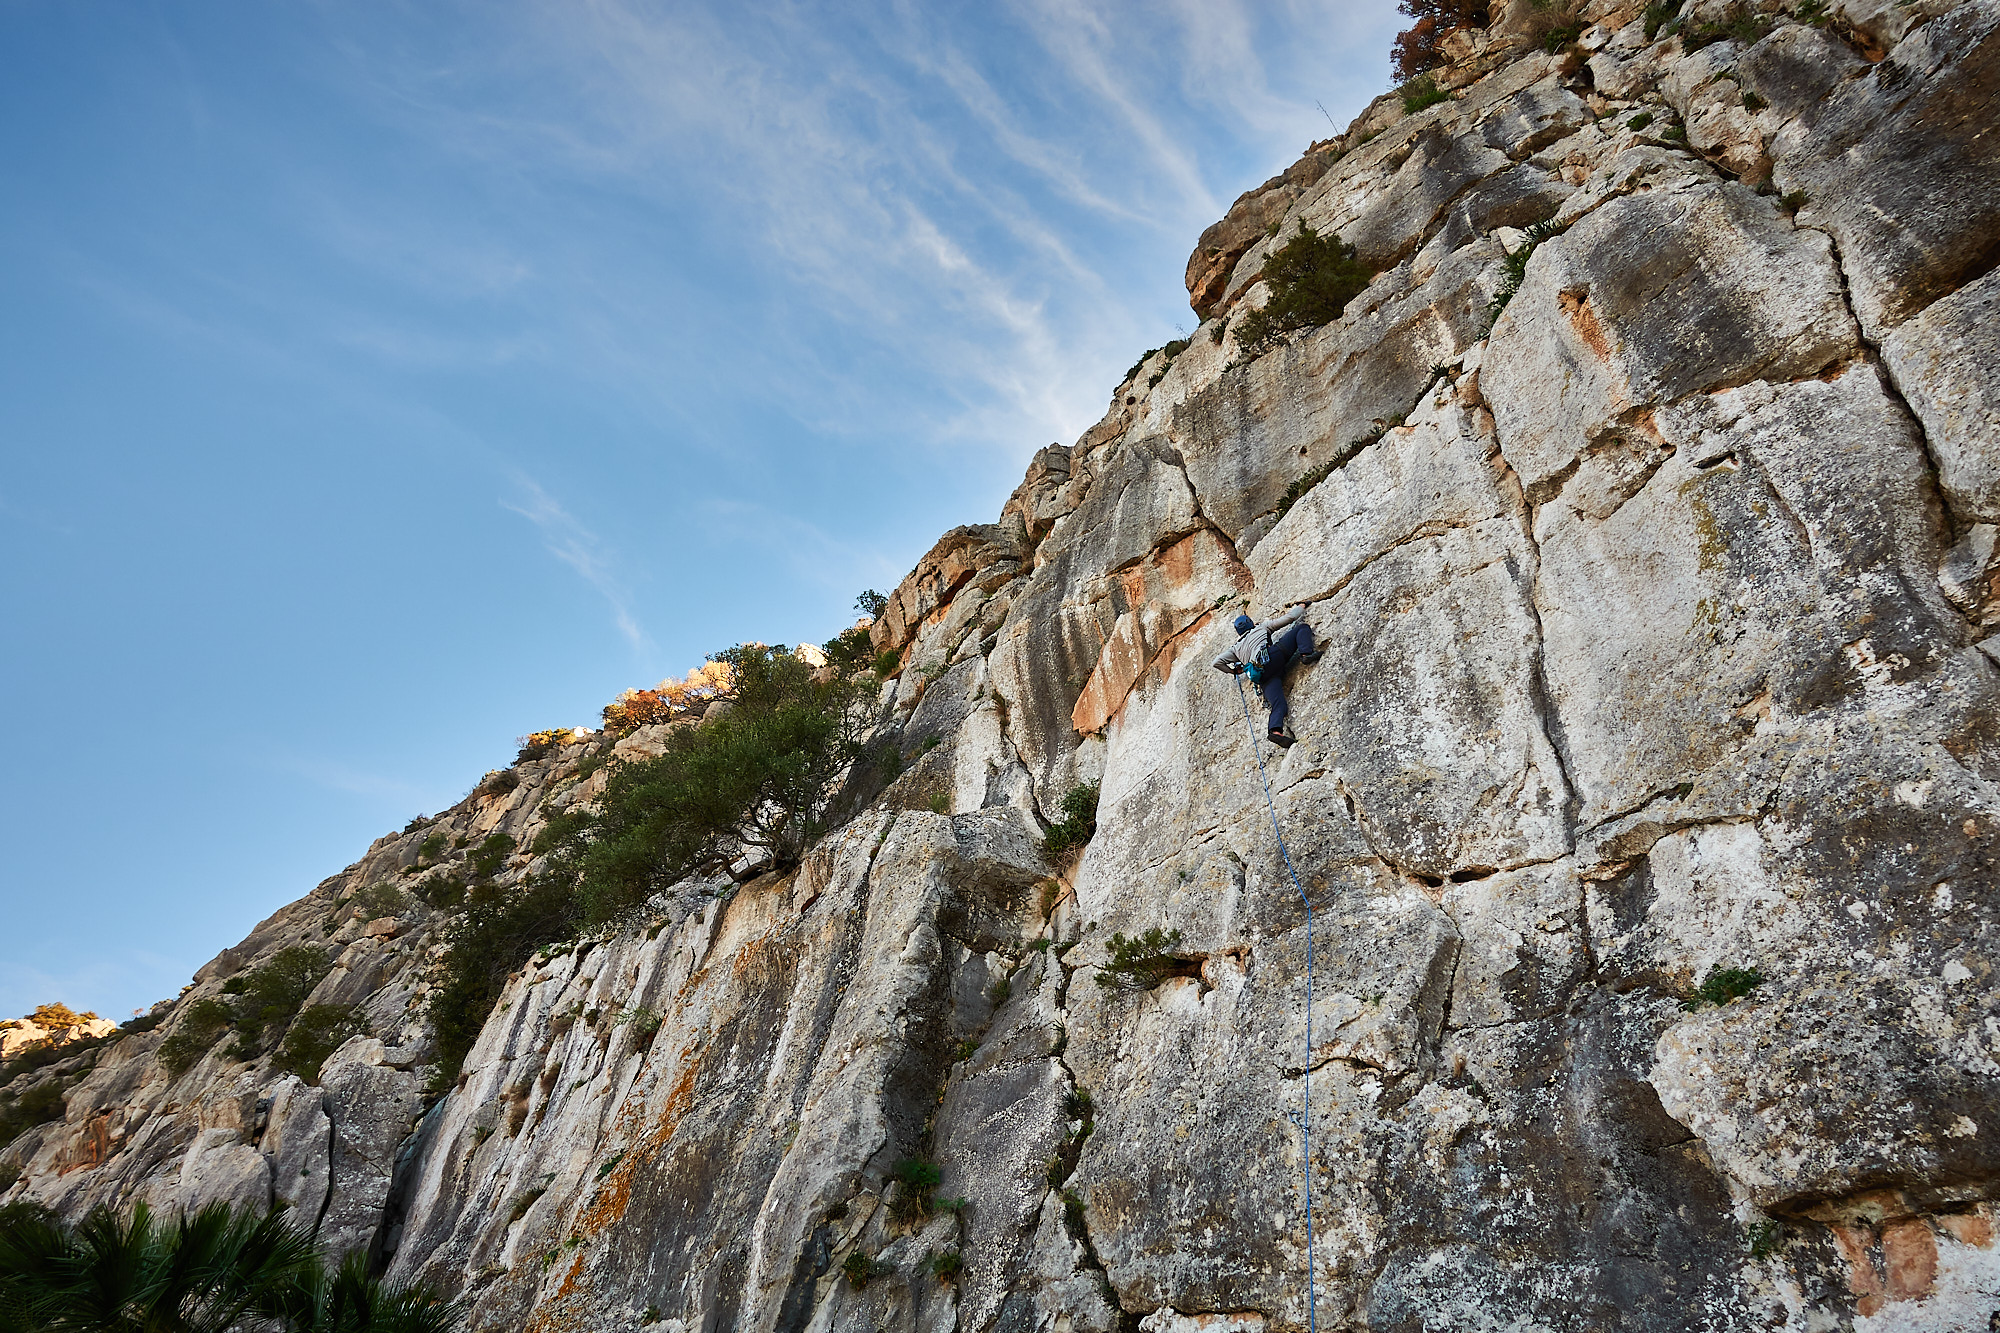 A climber sport climbing on a limestone crack in southern Spain with blue sky above